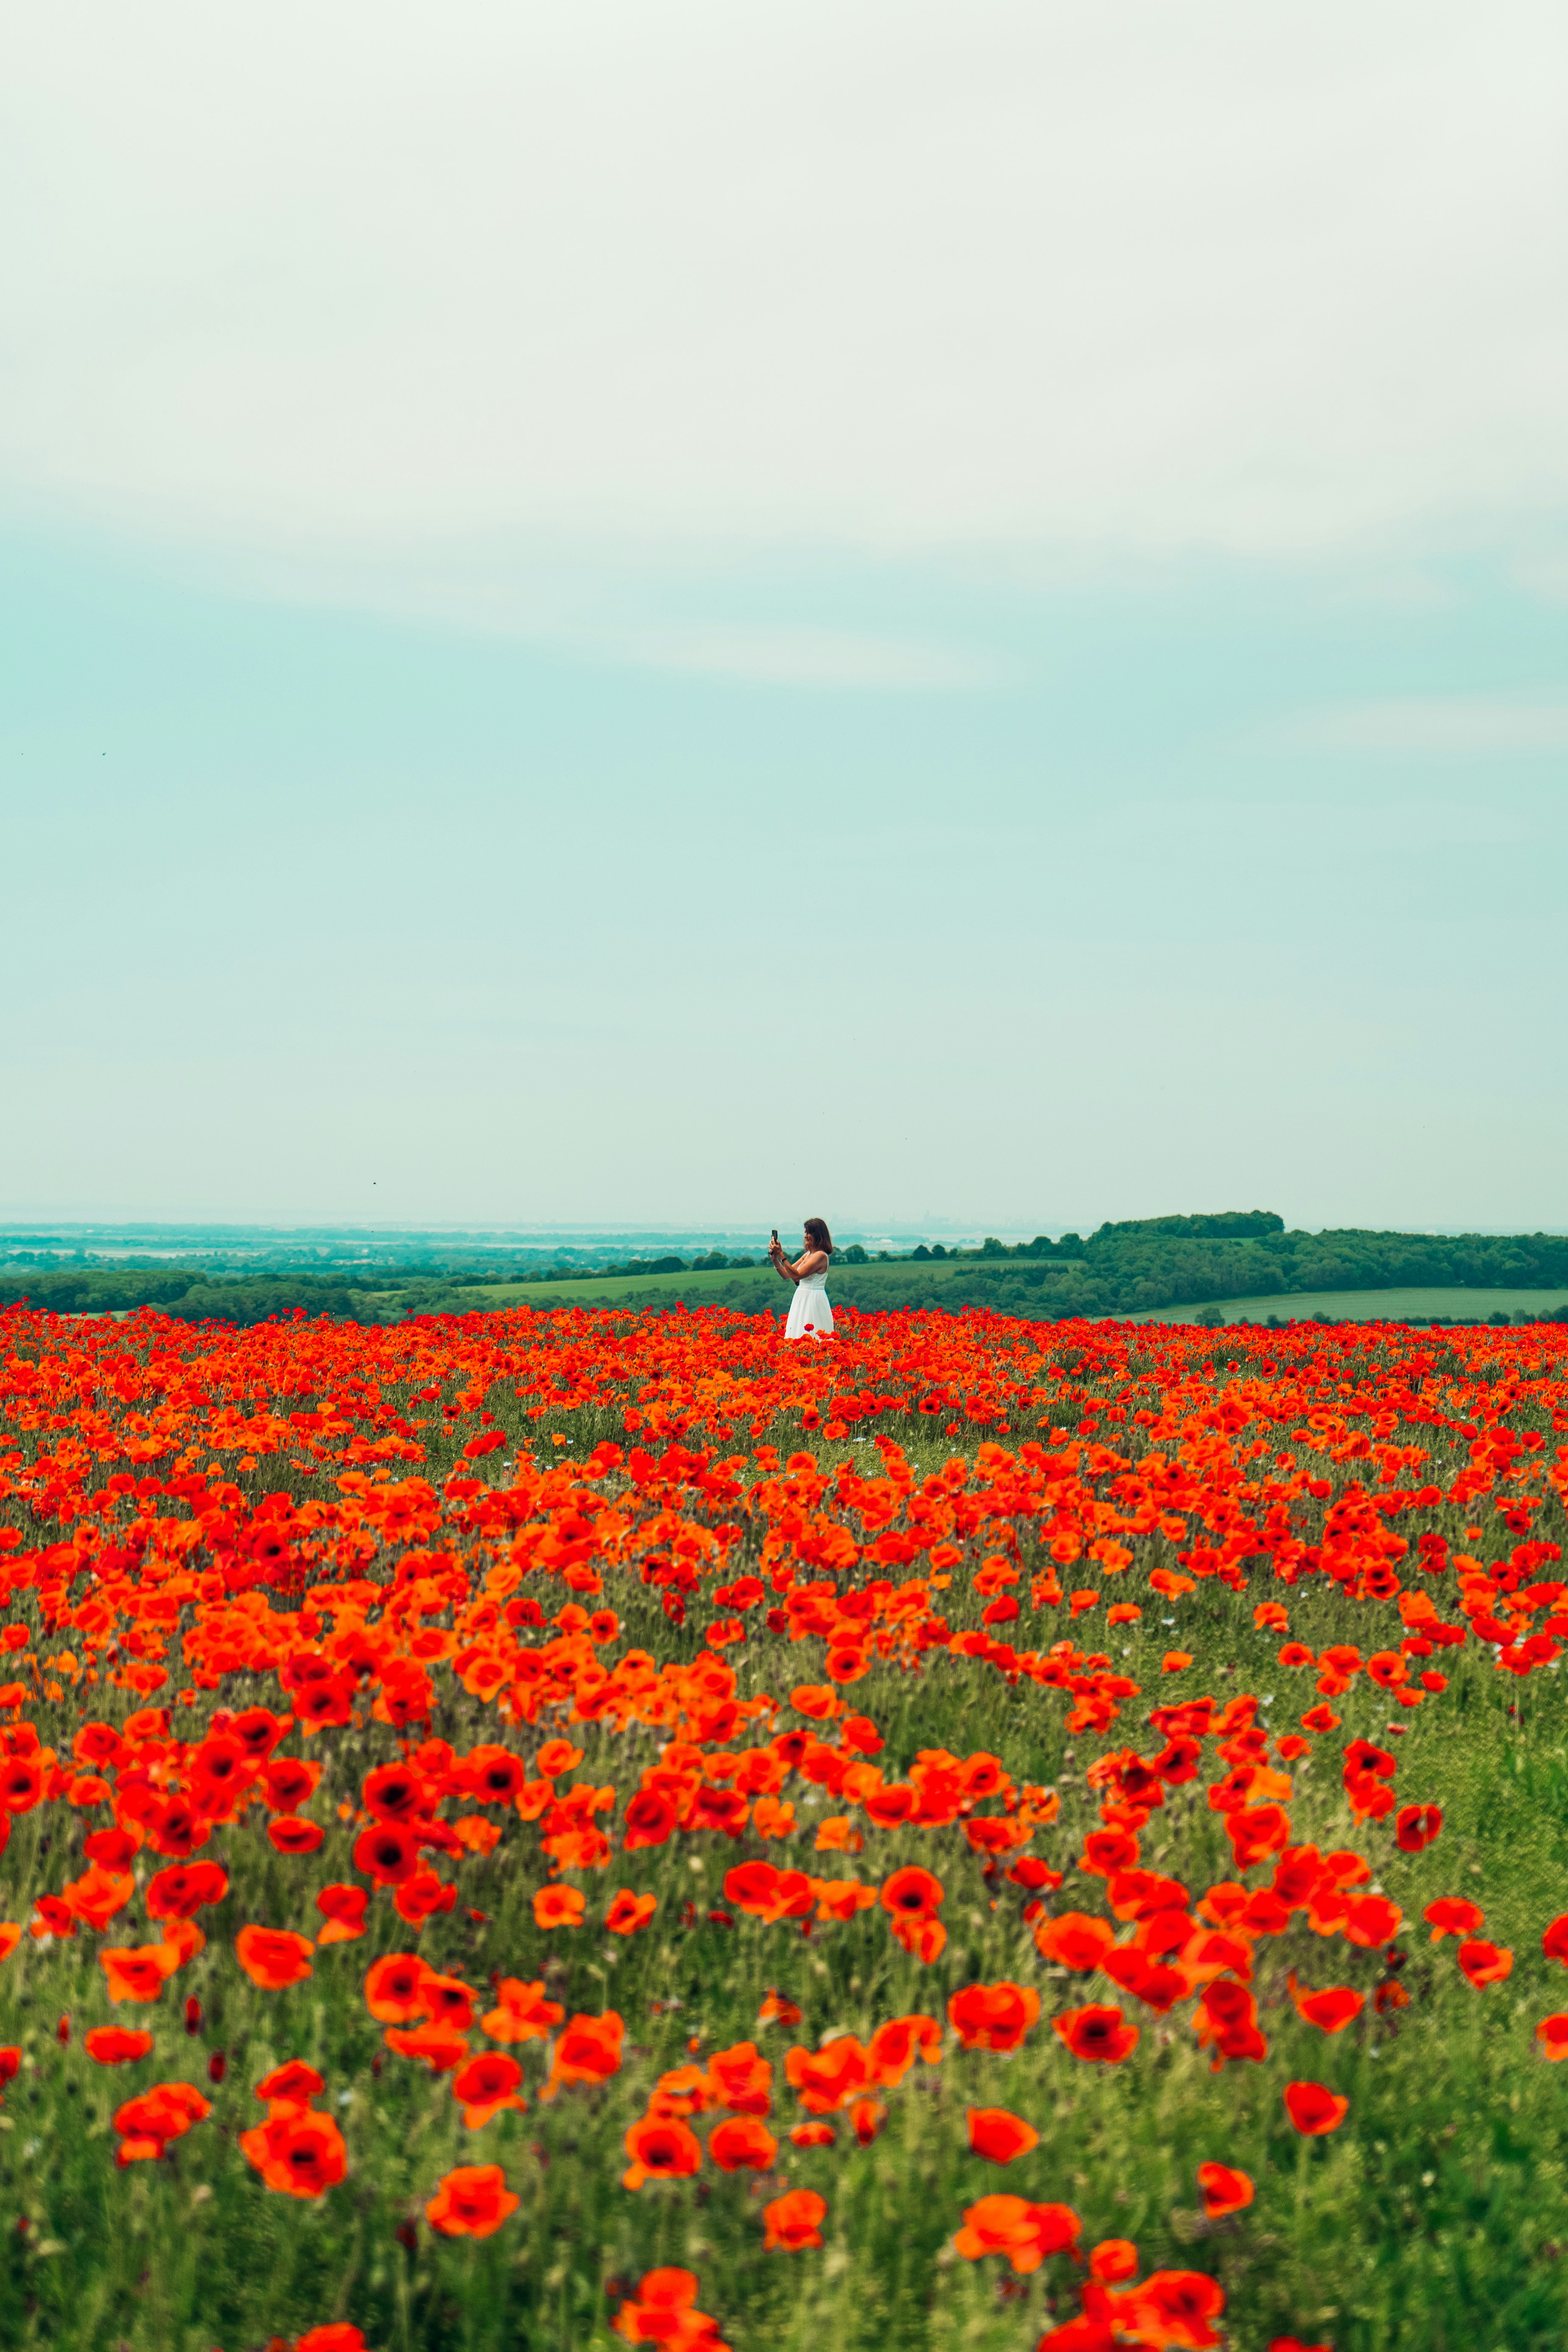 woman in white dress walking on red flower field during daytime